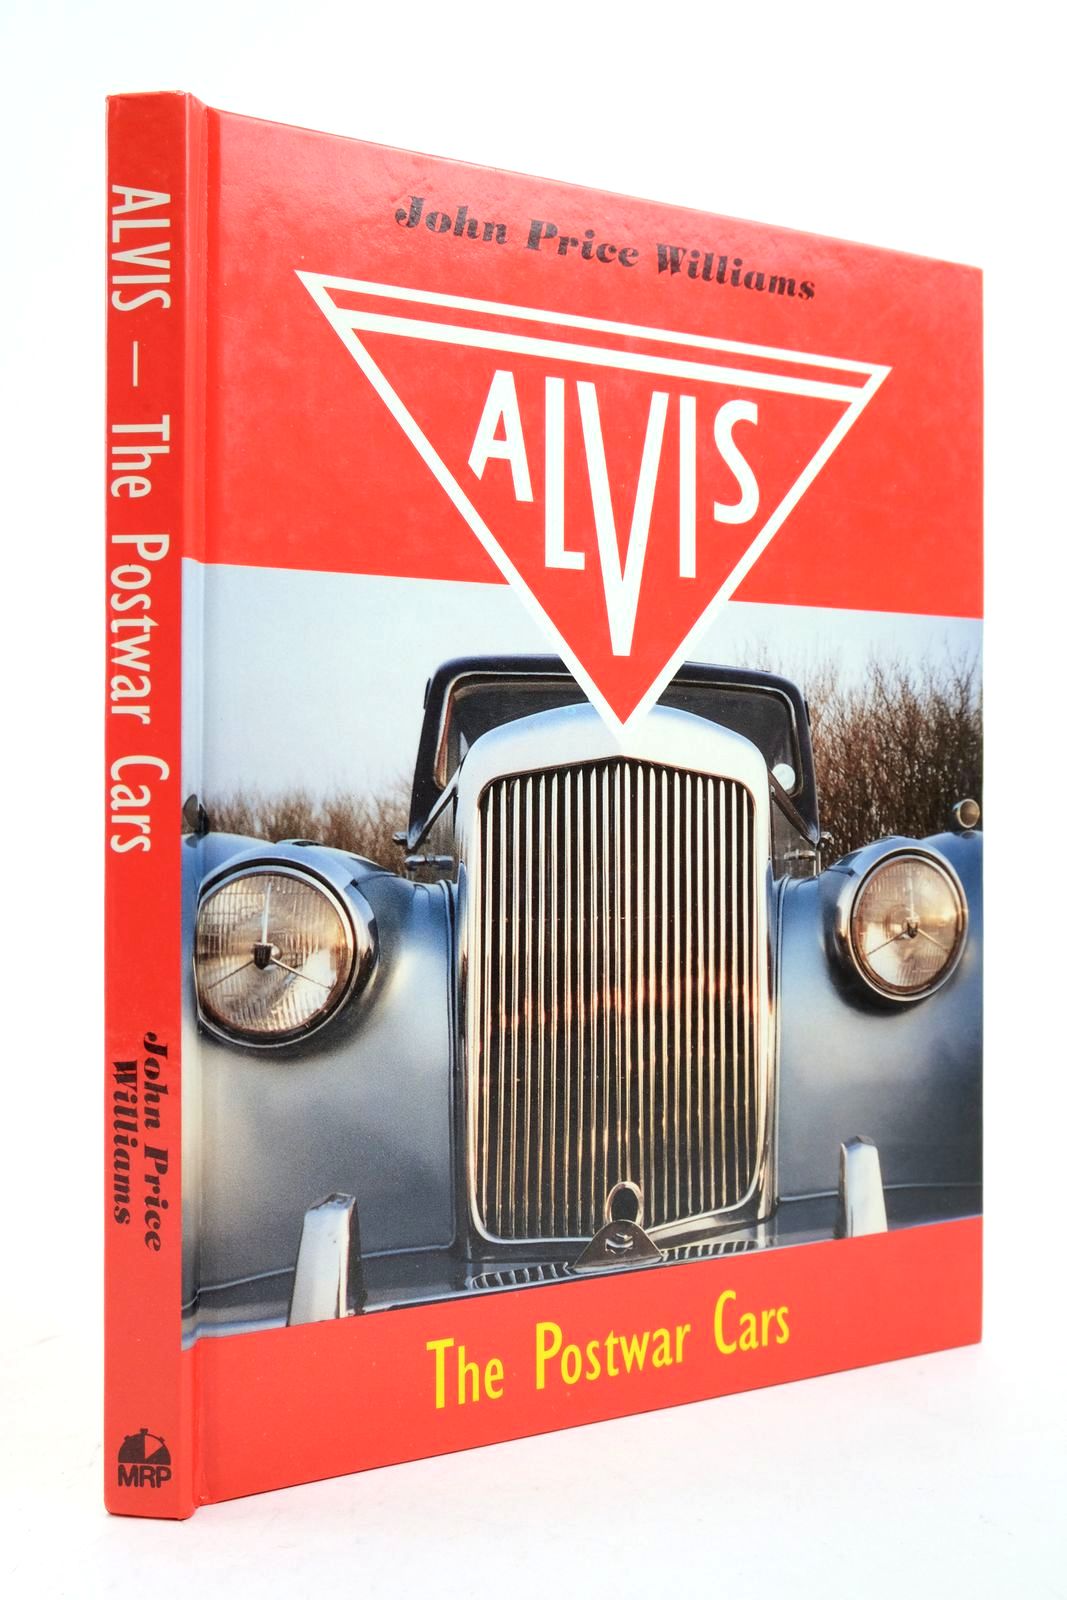 Photo of ALVIS: THE POSTWAR CARS written by Williams, John Price published by MRP (STOCK CODE: 2139267)  for sale by Stella & Rose's Books